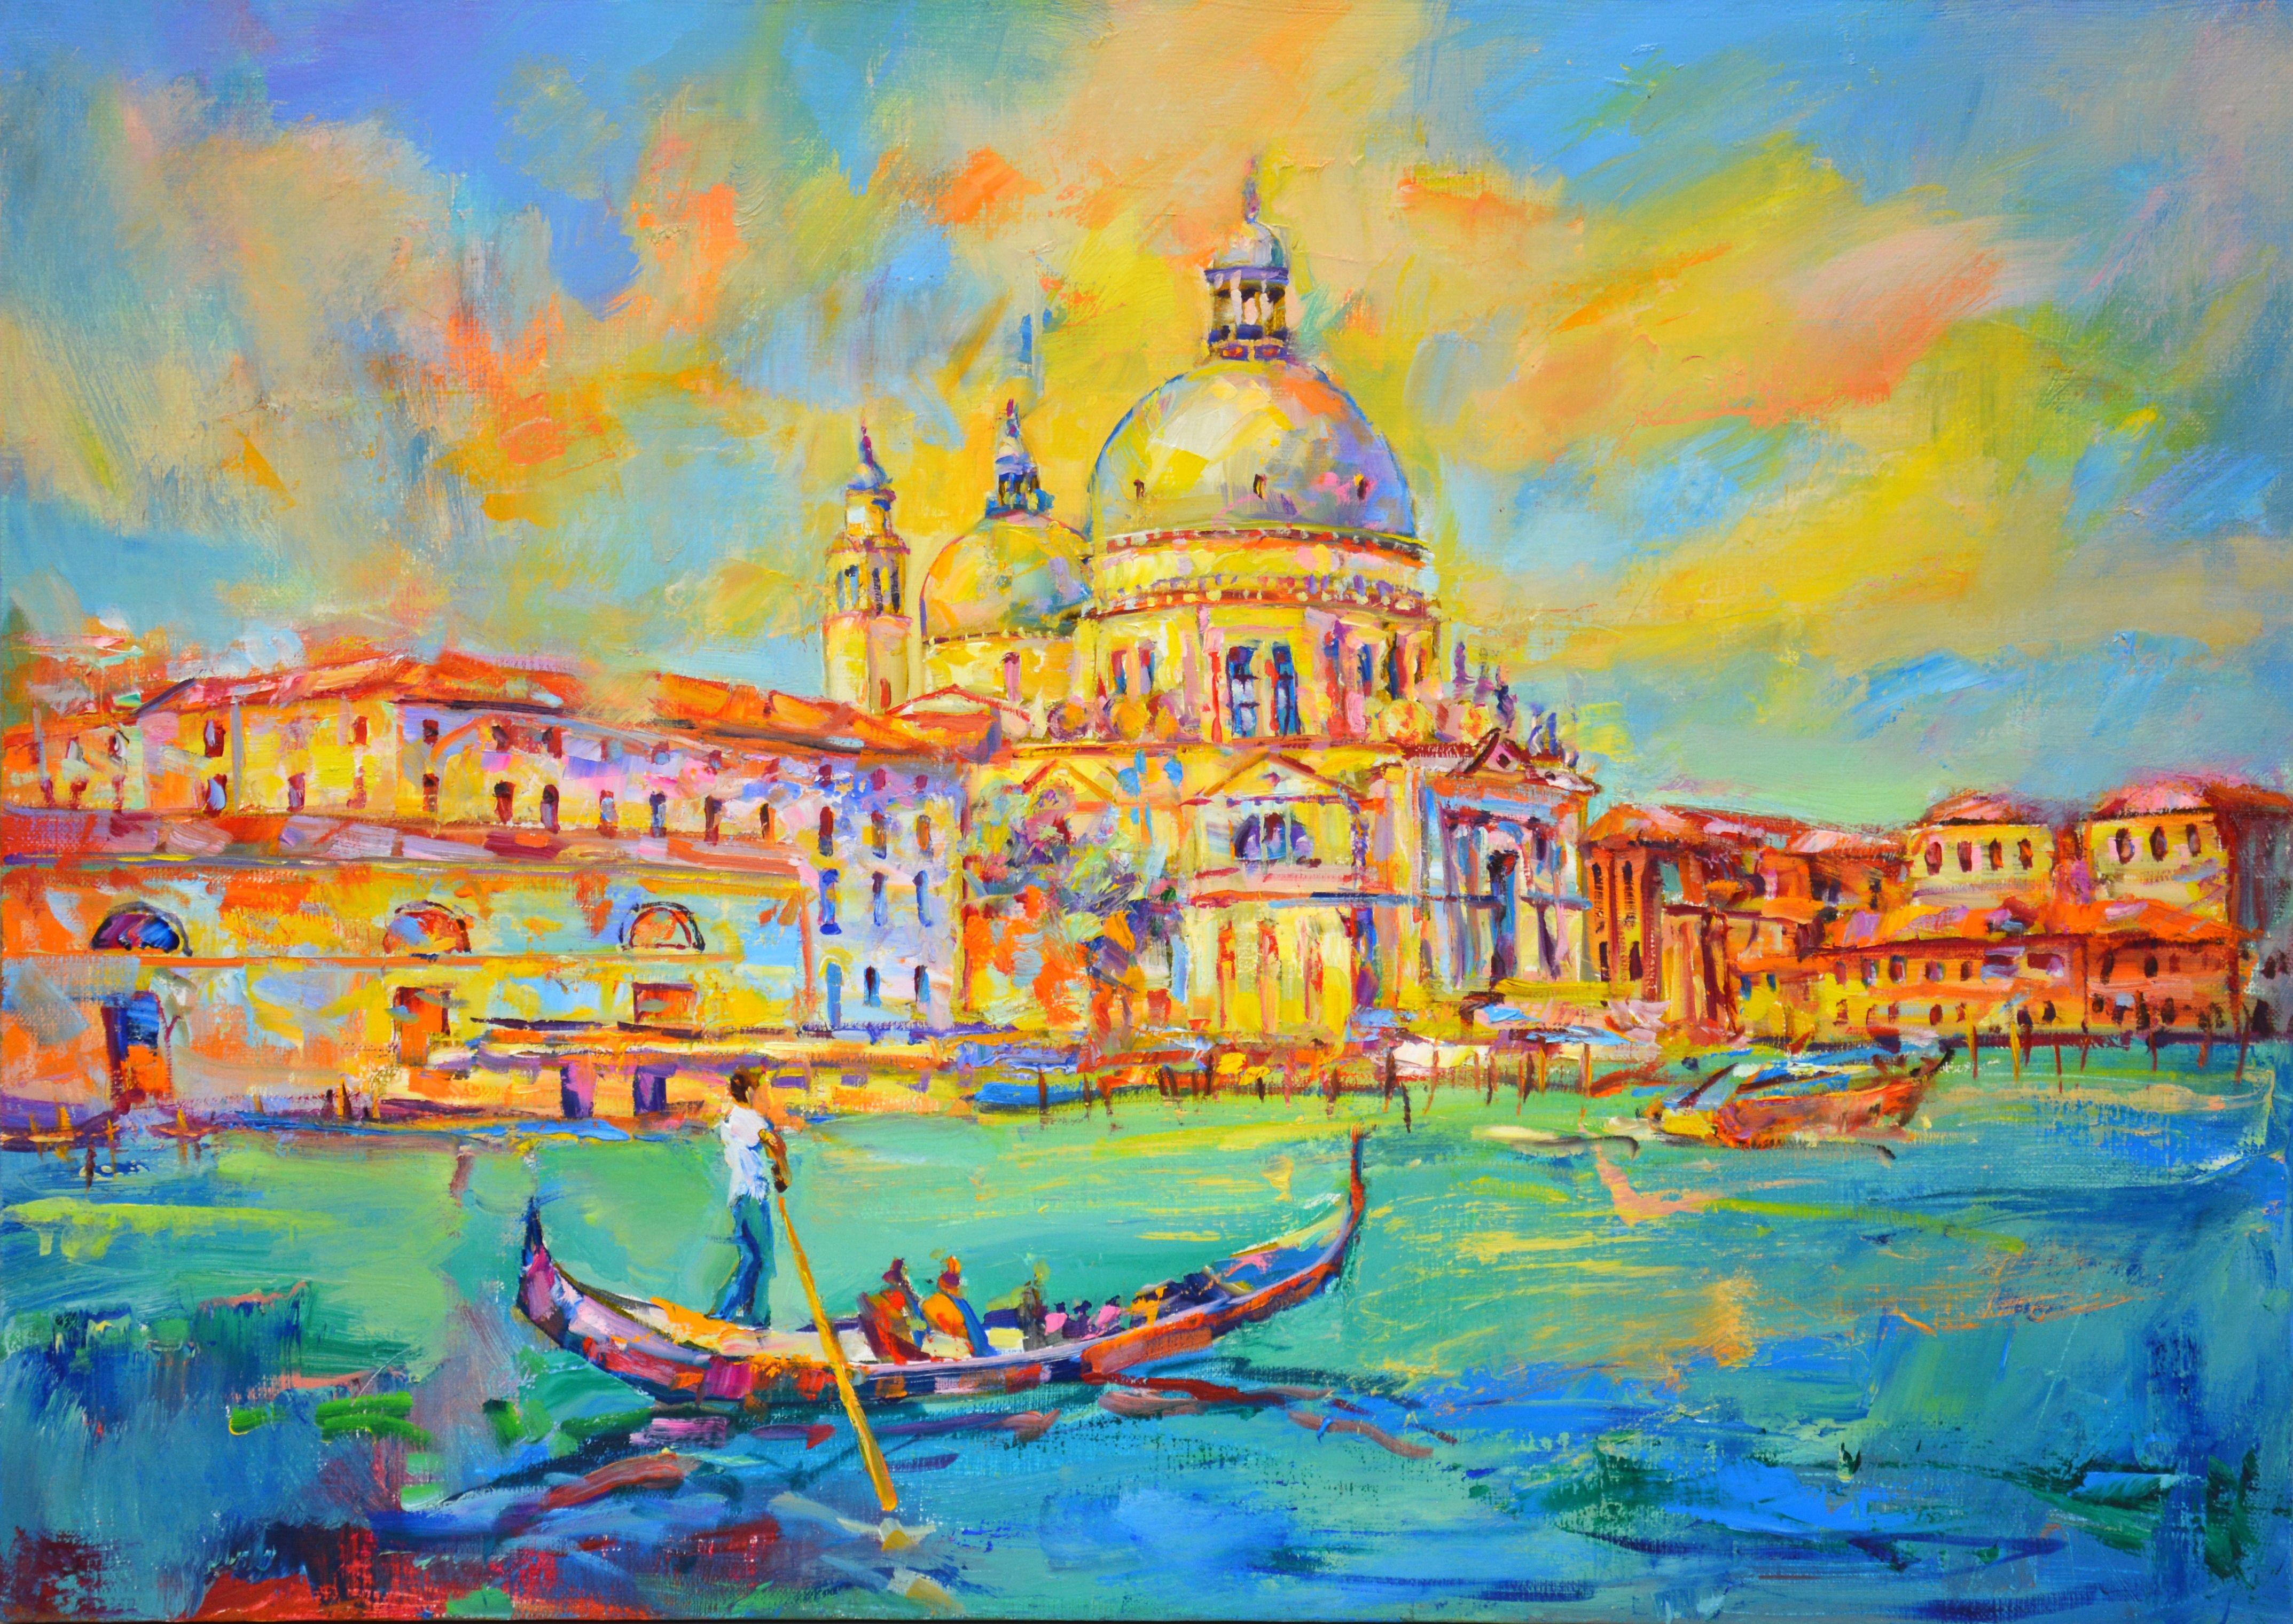 Venetian landscape in the style of expressionism. Cathedral of Santa Maria Della Salute, sea, gandolier. Venice is considered one of the most unusual and beautiful cities in the world. This is a fabulous city on the water, where you can ride a